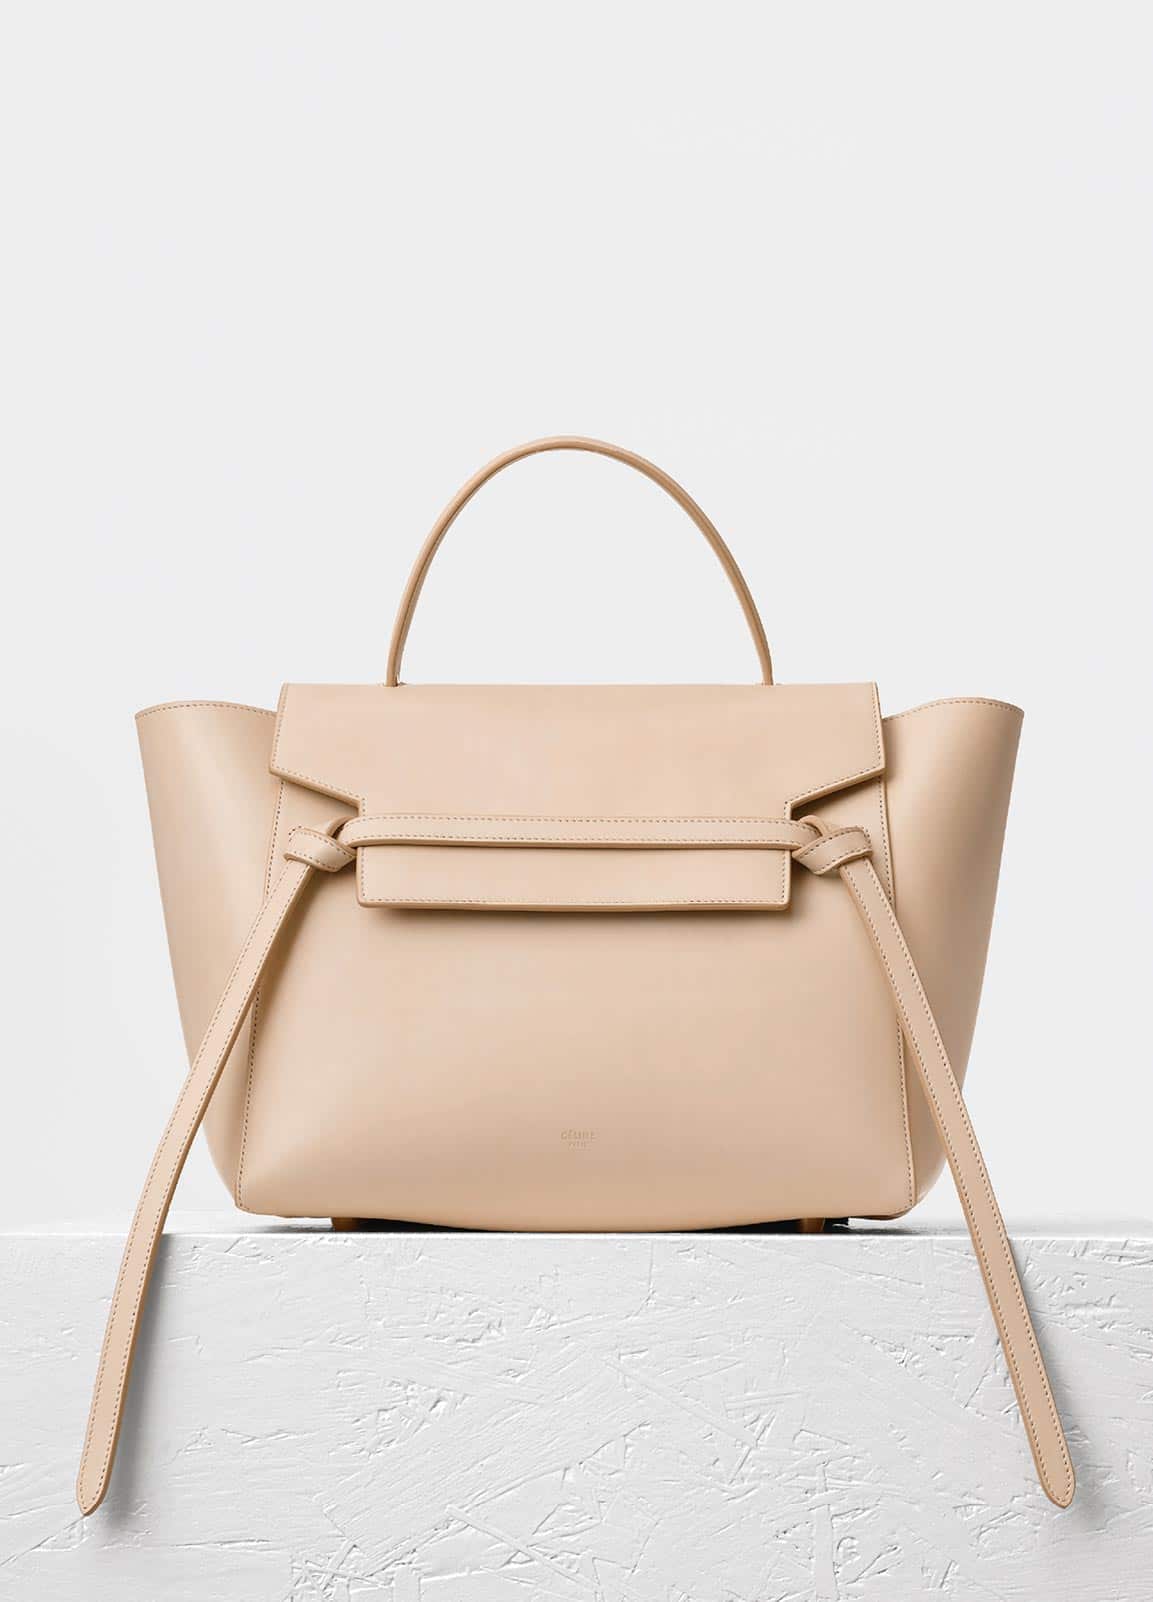 Celine Winter 2016 Bag Collection featuring Pastels - Spotted Fashion